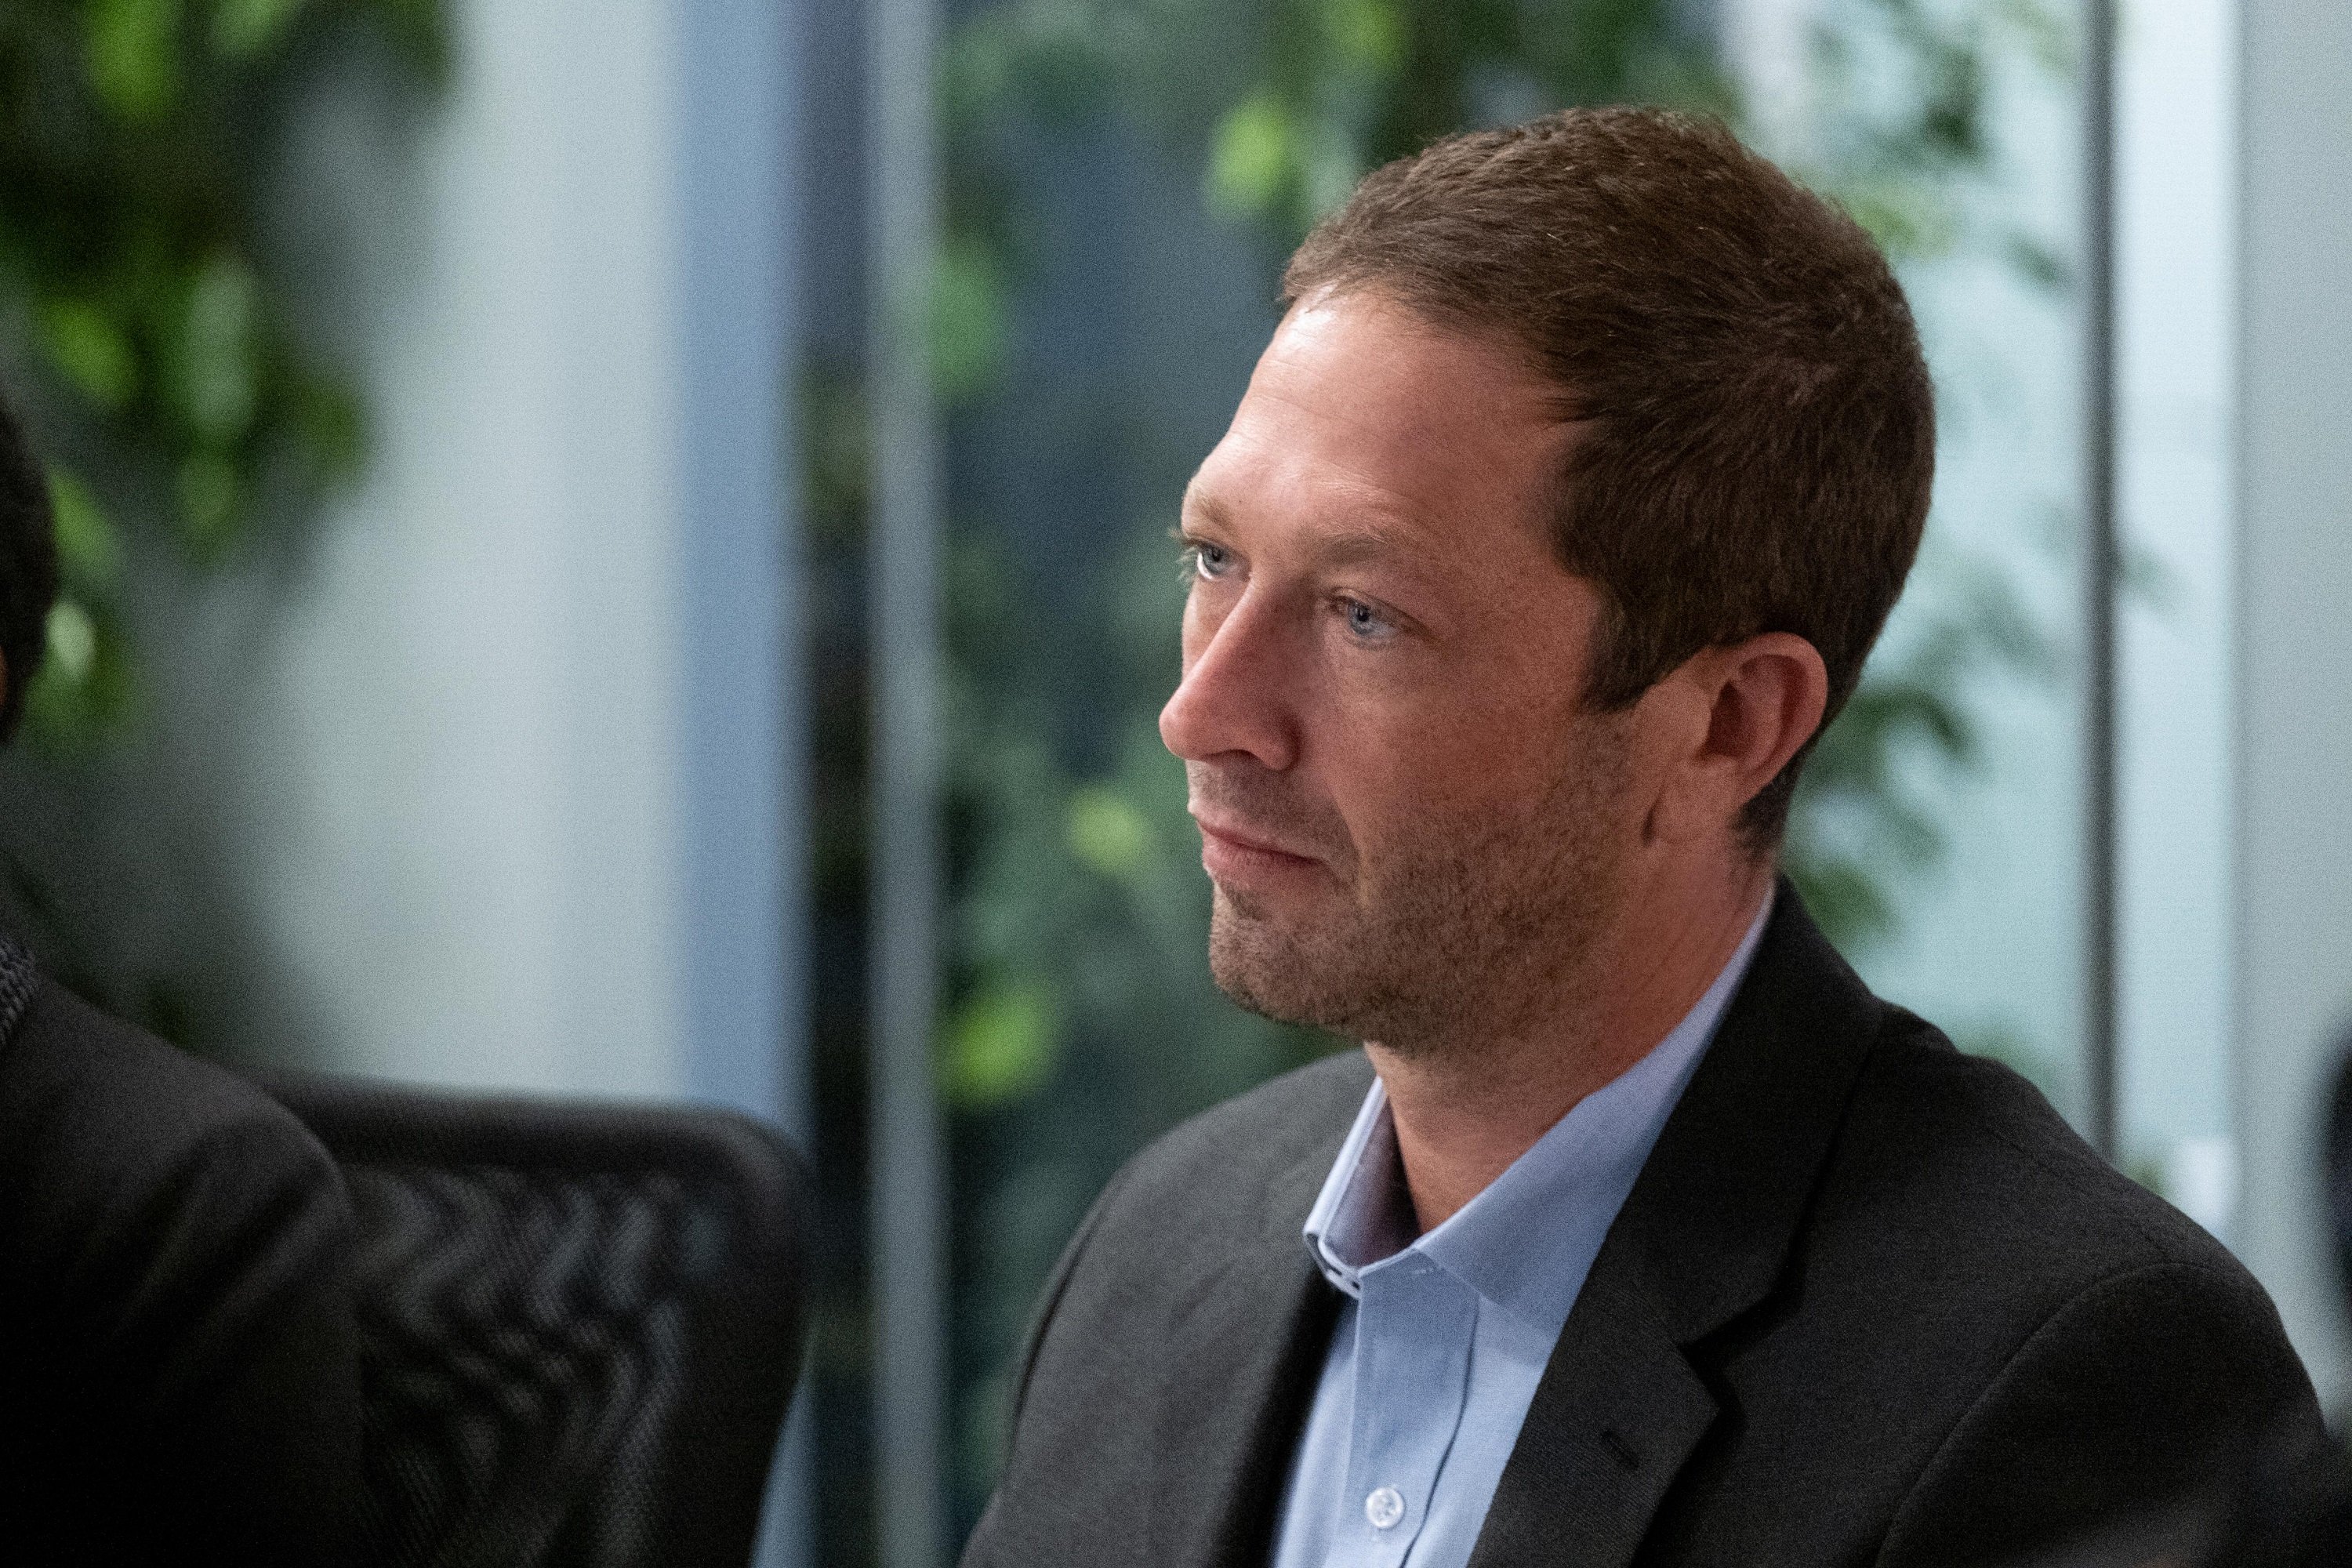 'The Dropout' Ebon Moss-Bachrach plays journalist John Carreyrou of the Wall Street Journal looking at someone